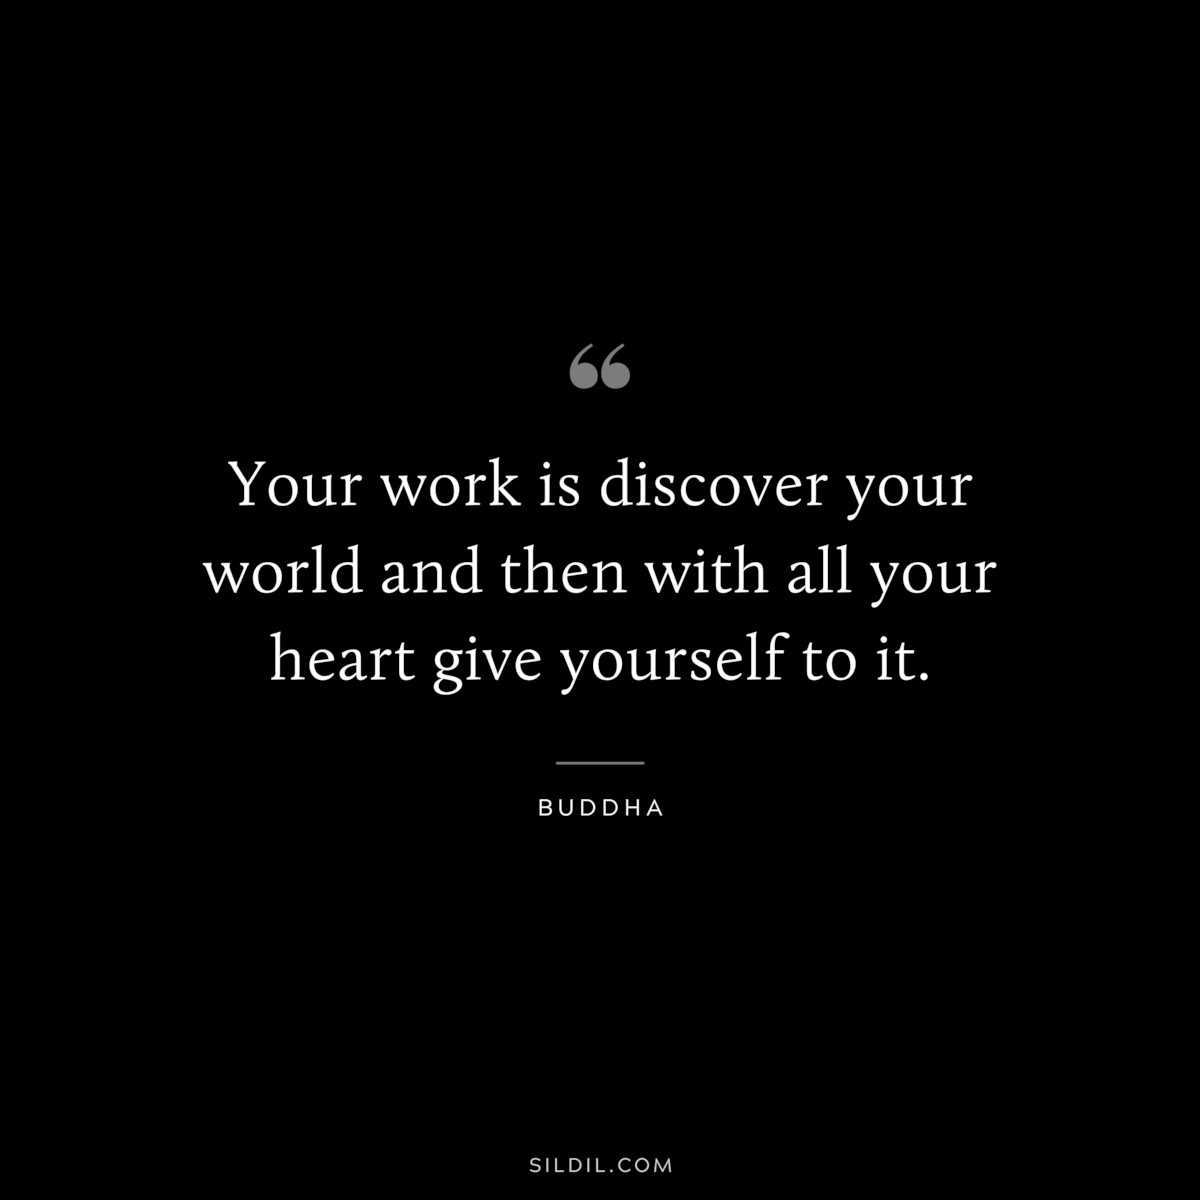 Your work is discover your world and then with all your heart give yourself to it. ― Buddha